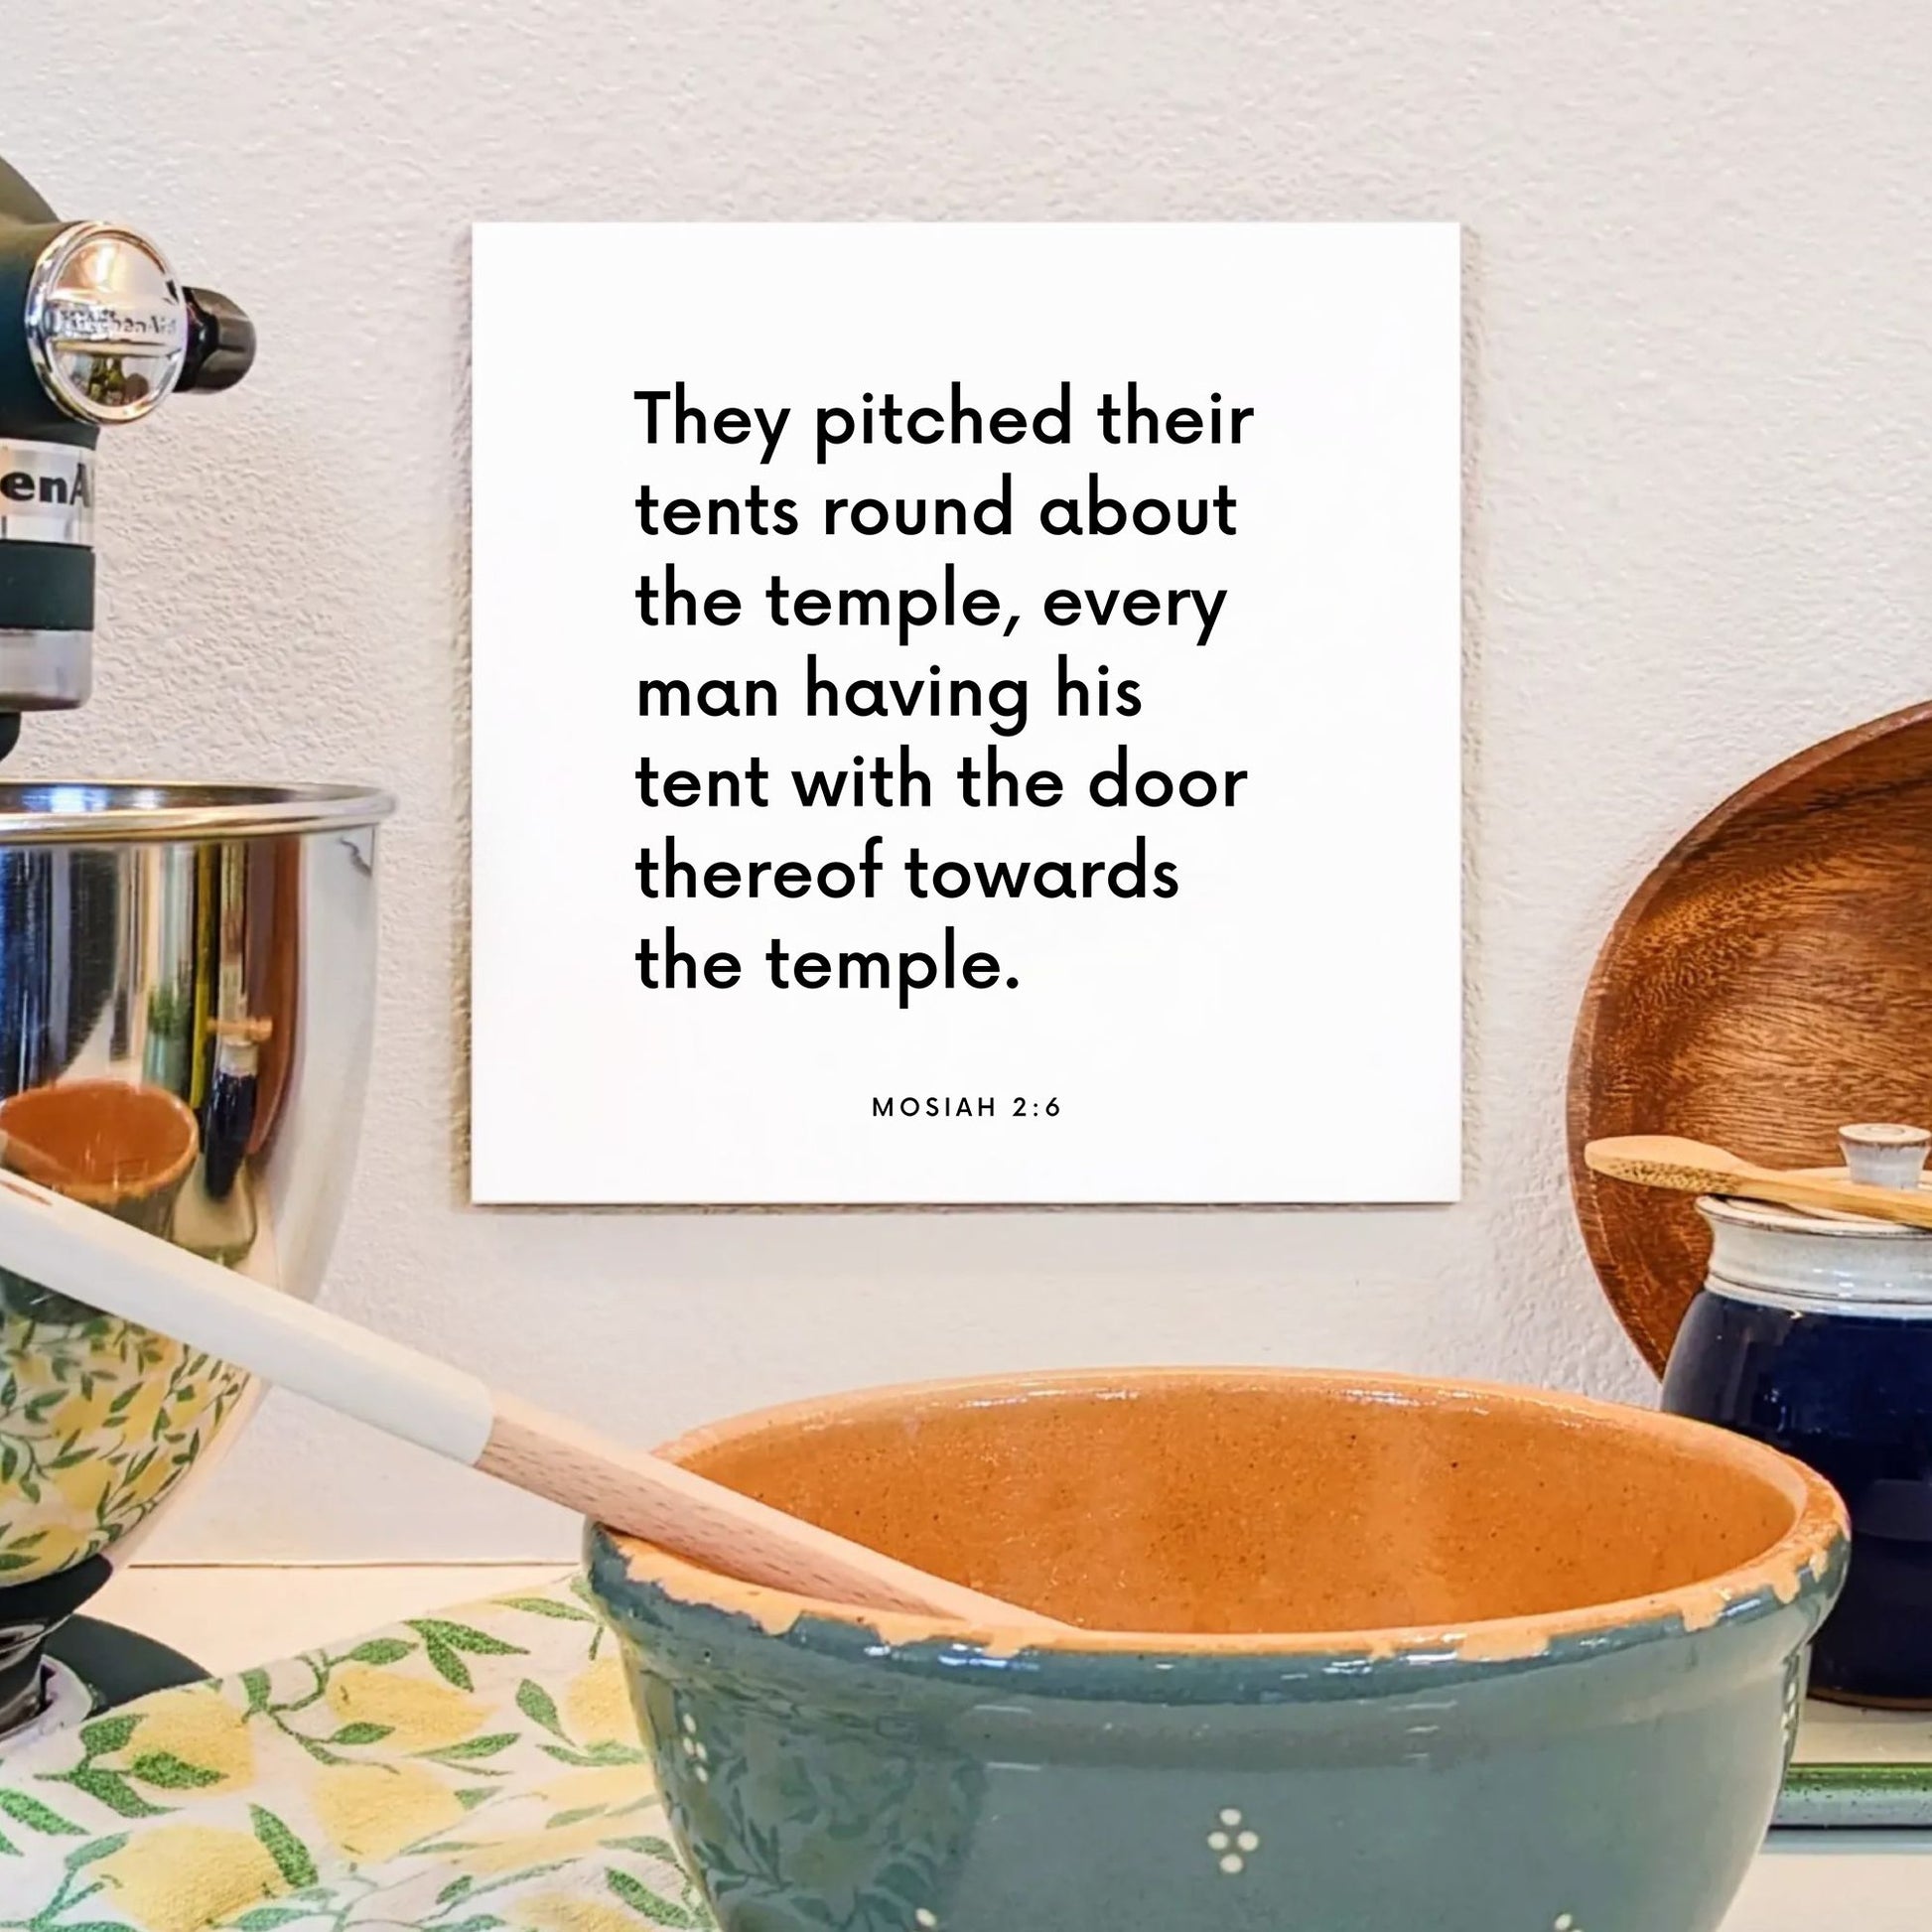 Kitchen mouting of the scripture tile for Mosiah 2:6 - "They pitched their tents round about the temple"